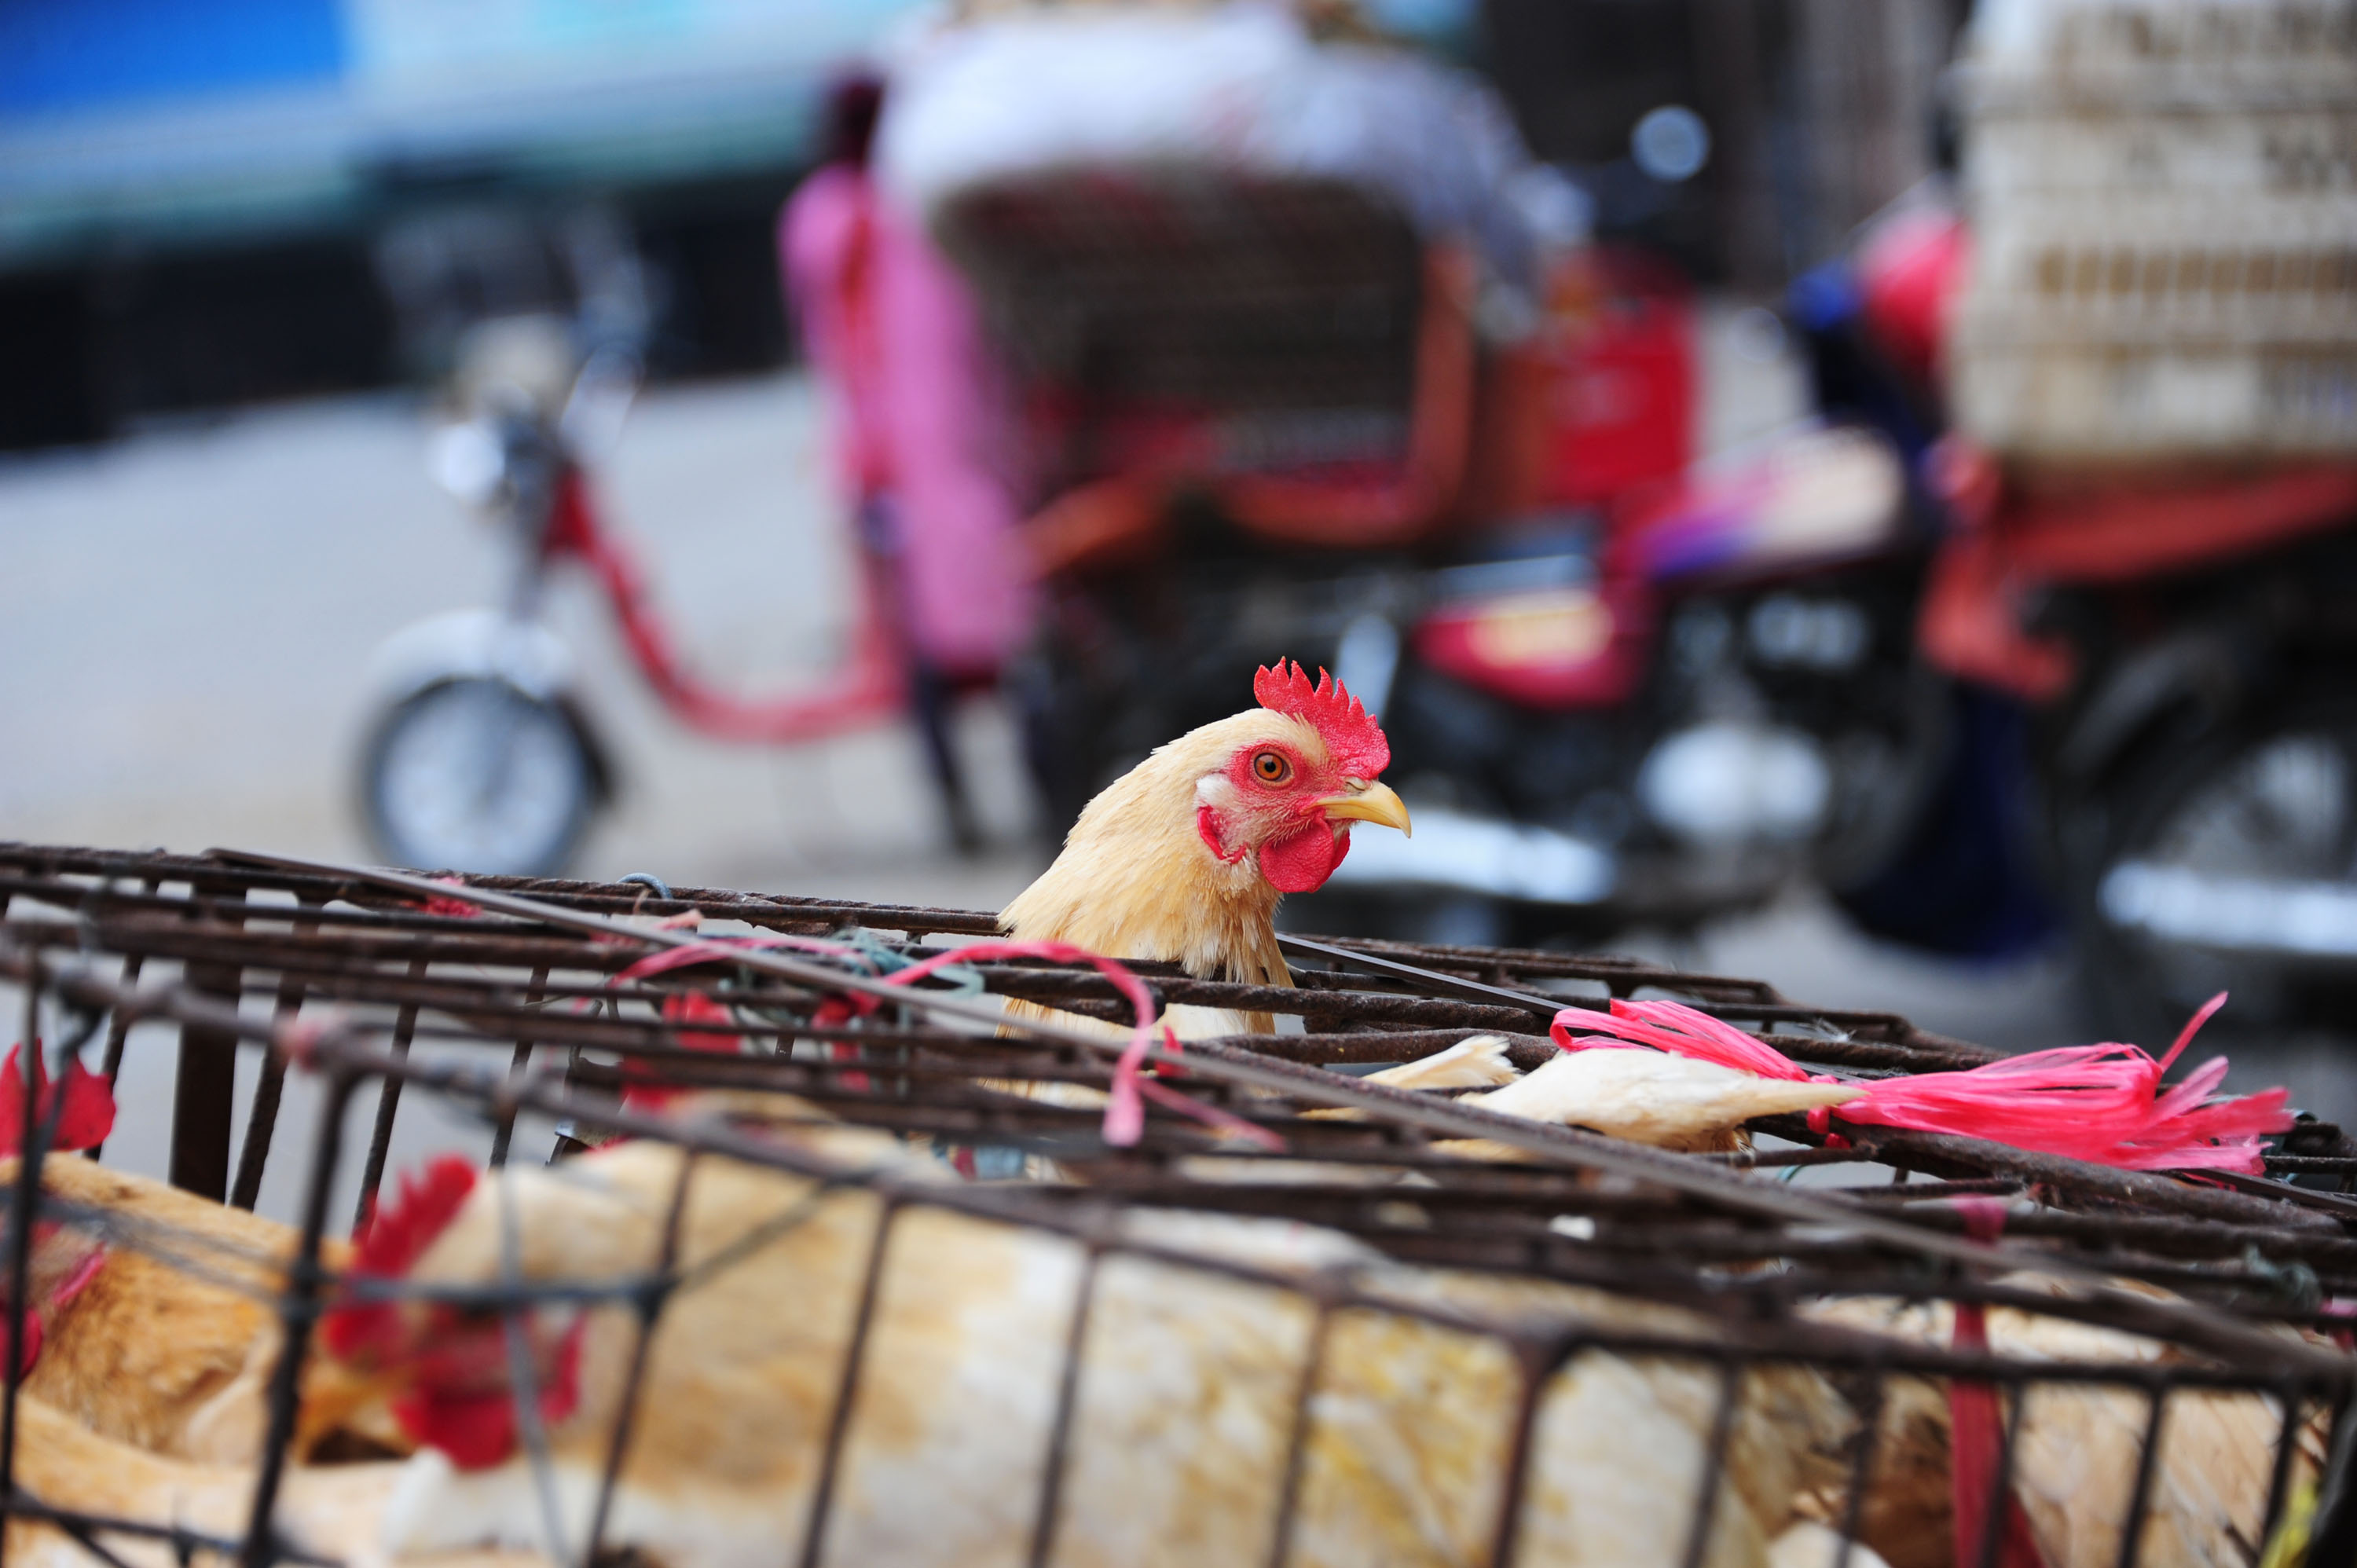 Two H5N6 cases reported in S China including one death